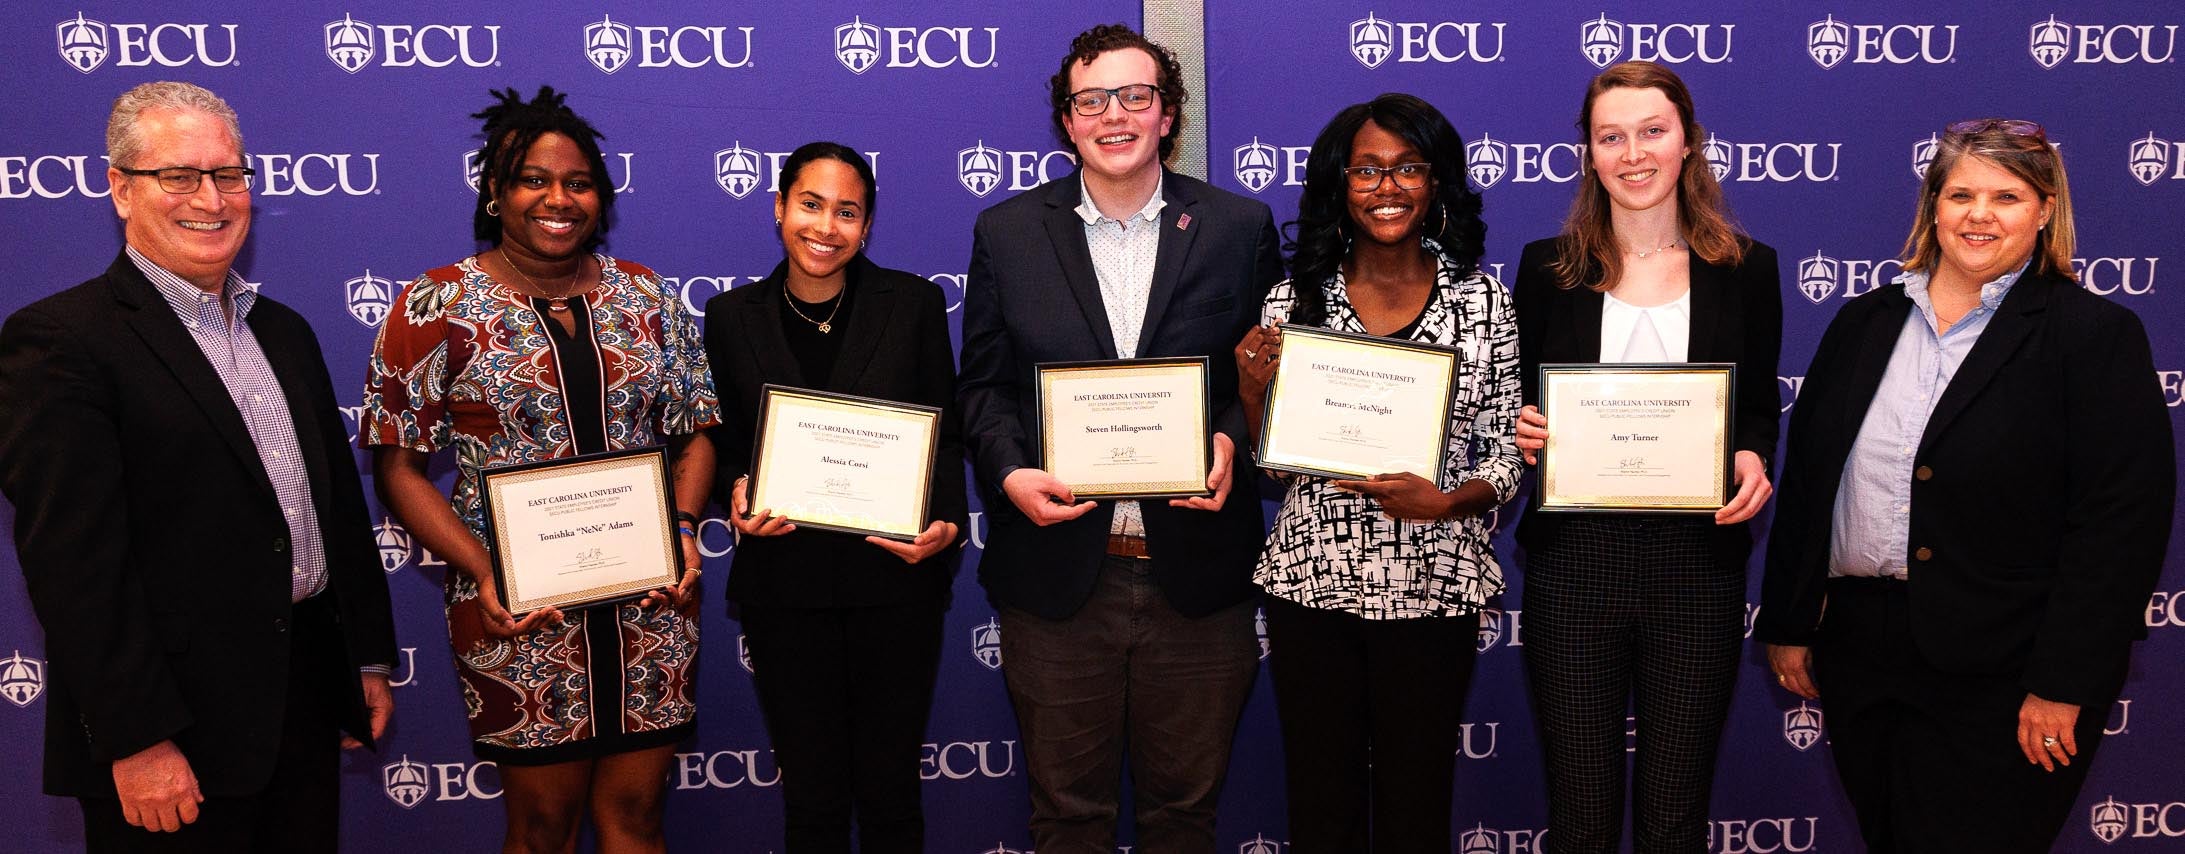 Rich Hutson, left, senior vice president of the State Employees’ Credit Union, and Sharon Paynter, far right, assistant vice chancellor for economic and community engagement at ECU, recognized the SECU Public Service Fellows who were able to attend the ceremony.